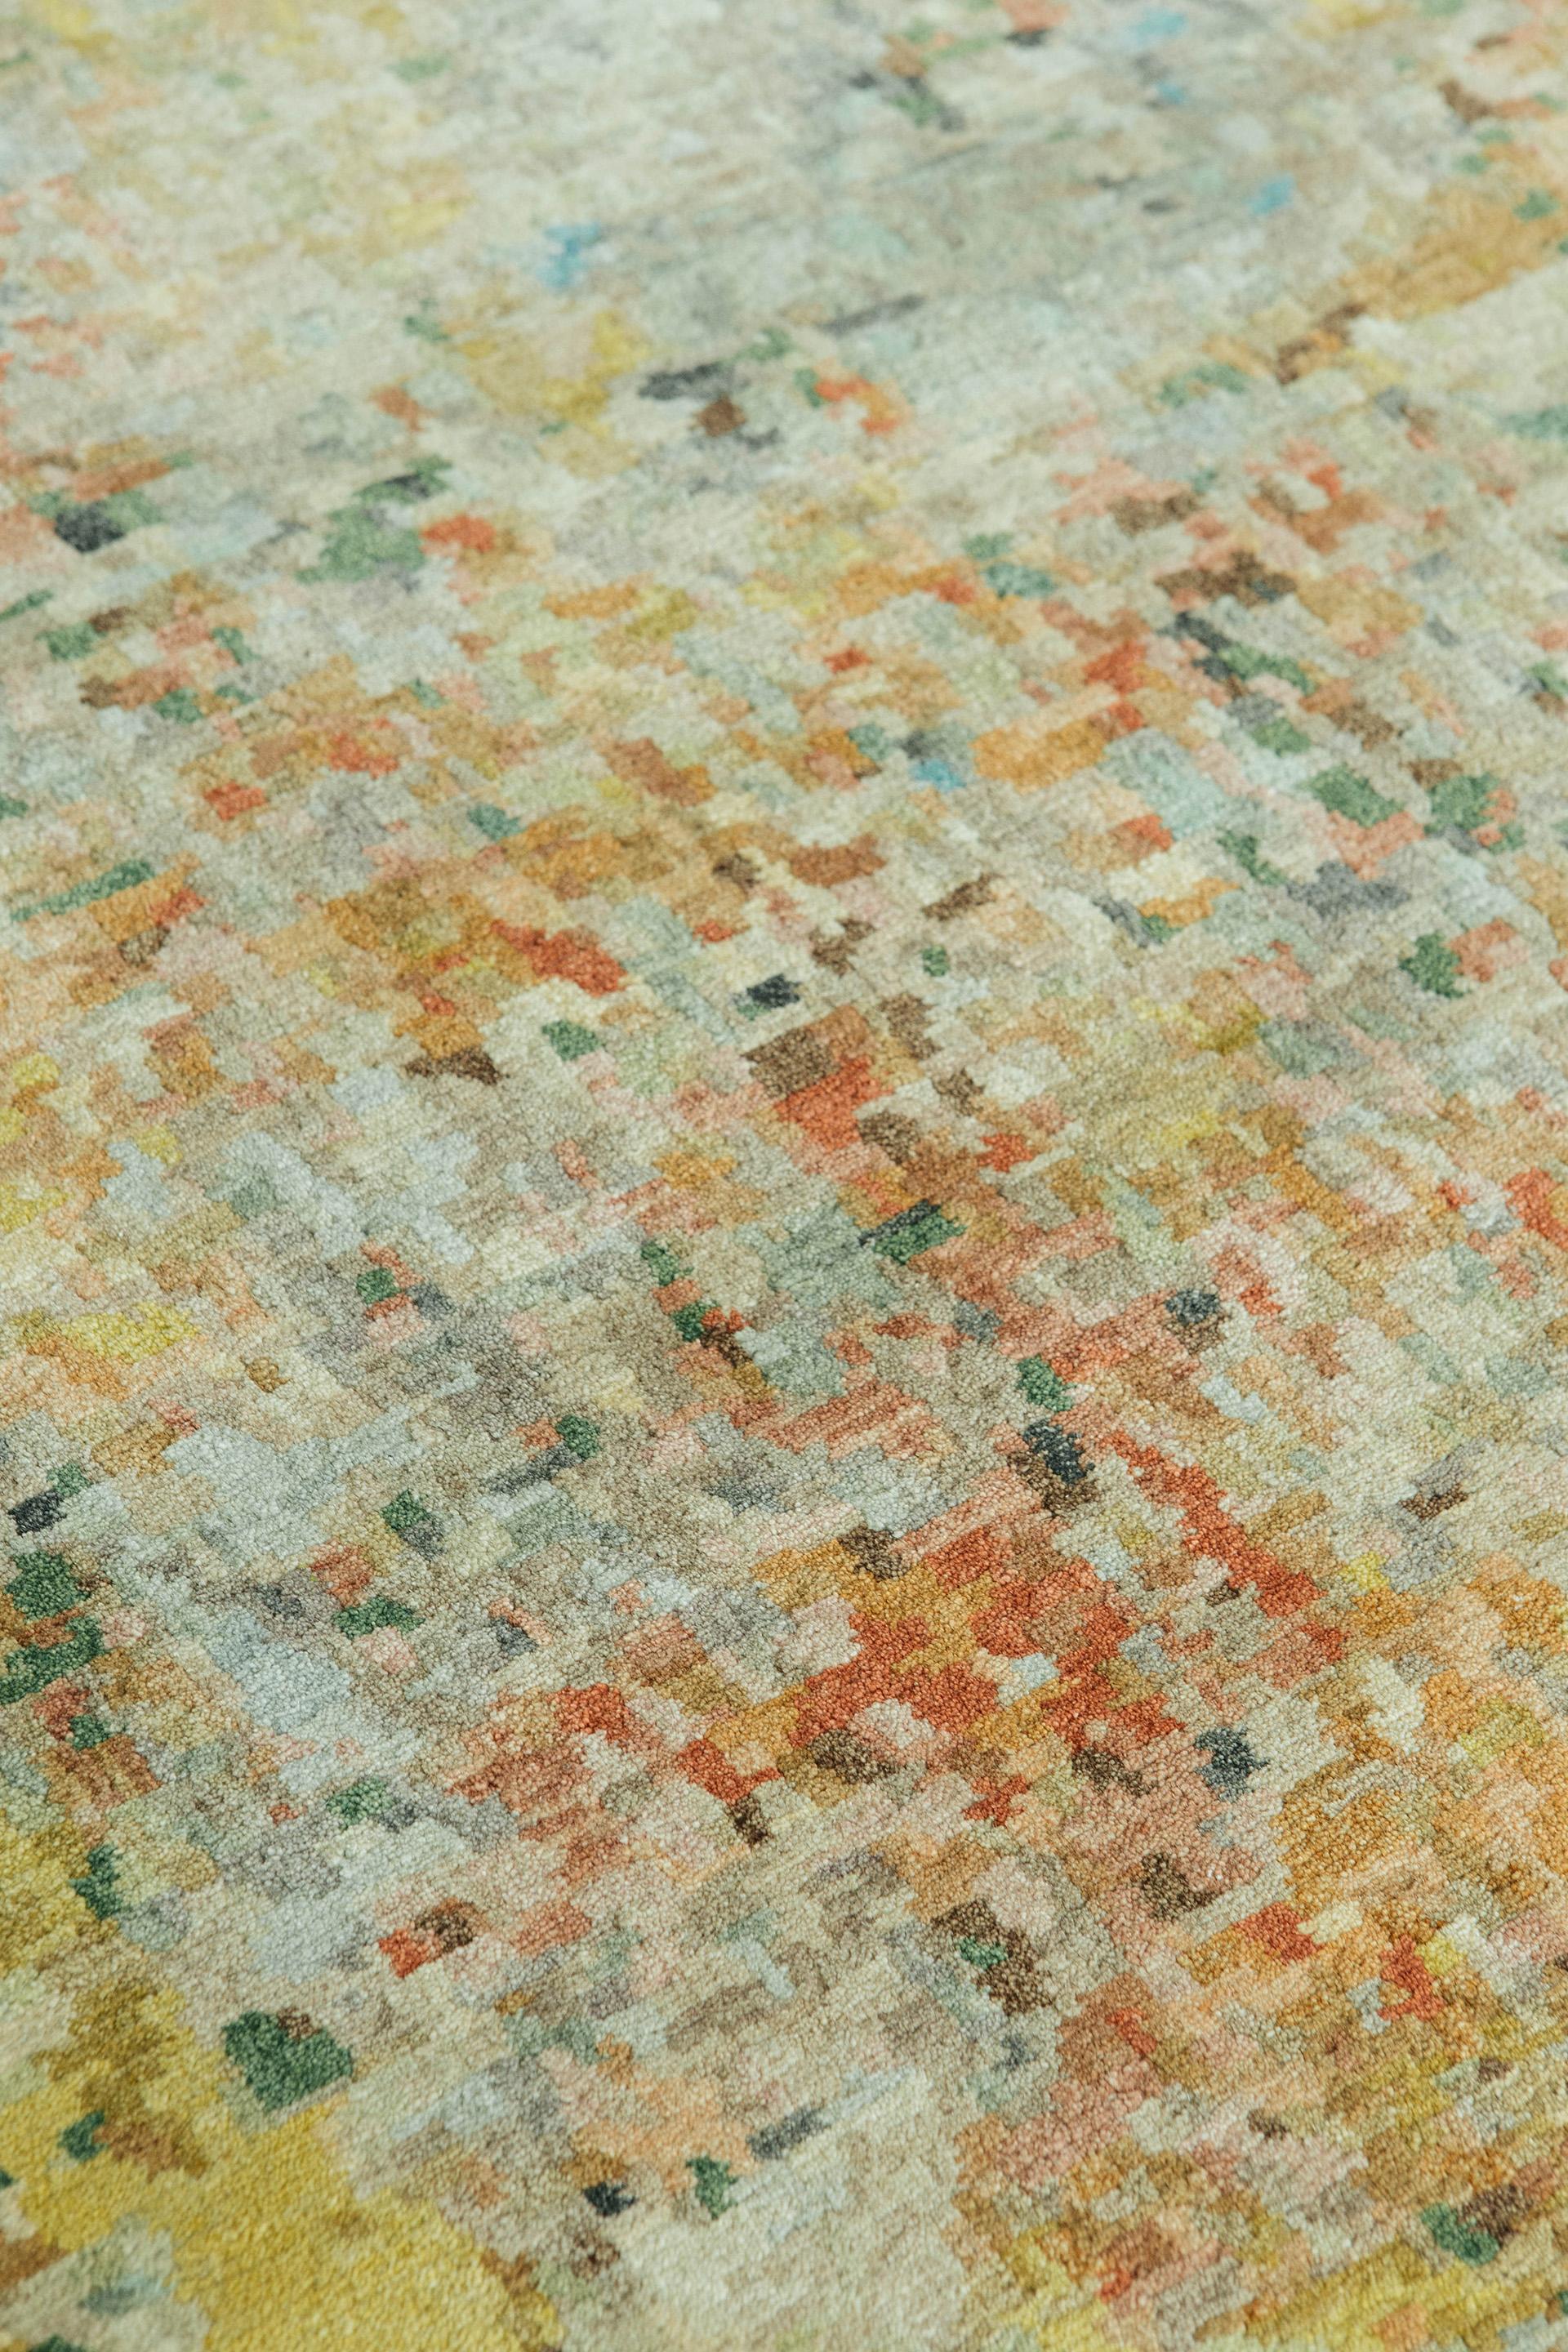 Verdant Conjure resembles a field of beautiful florals. The abundance of colors creates an invigorating experience throughout colorful this wool and silk pile weave.

Rug number: 26378
Size: 9' 0